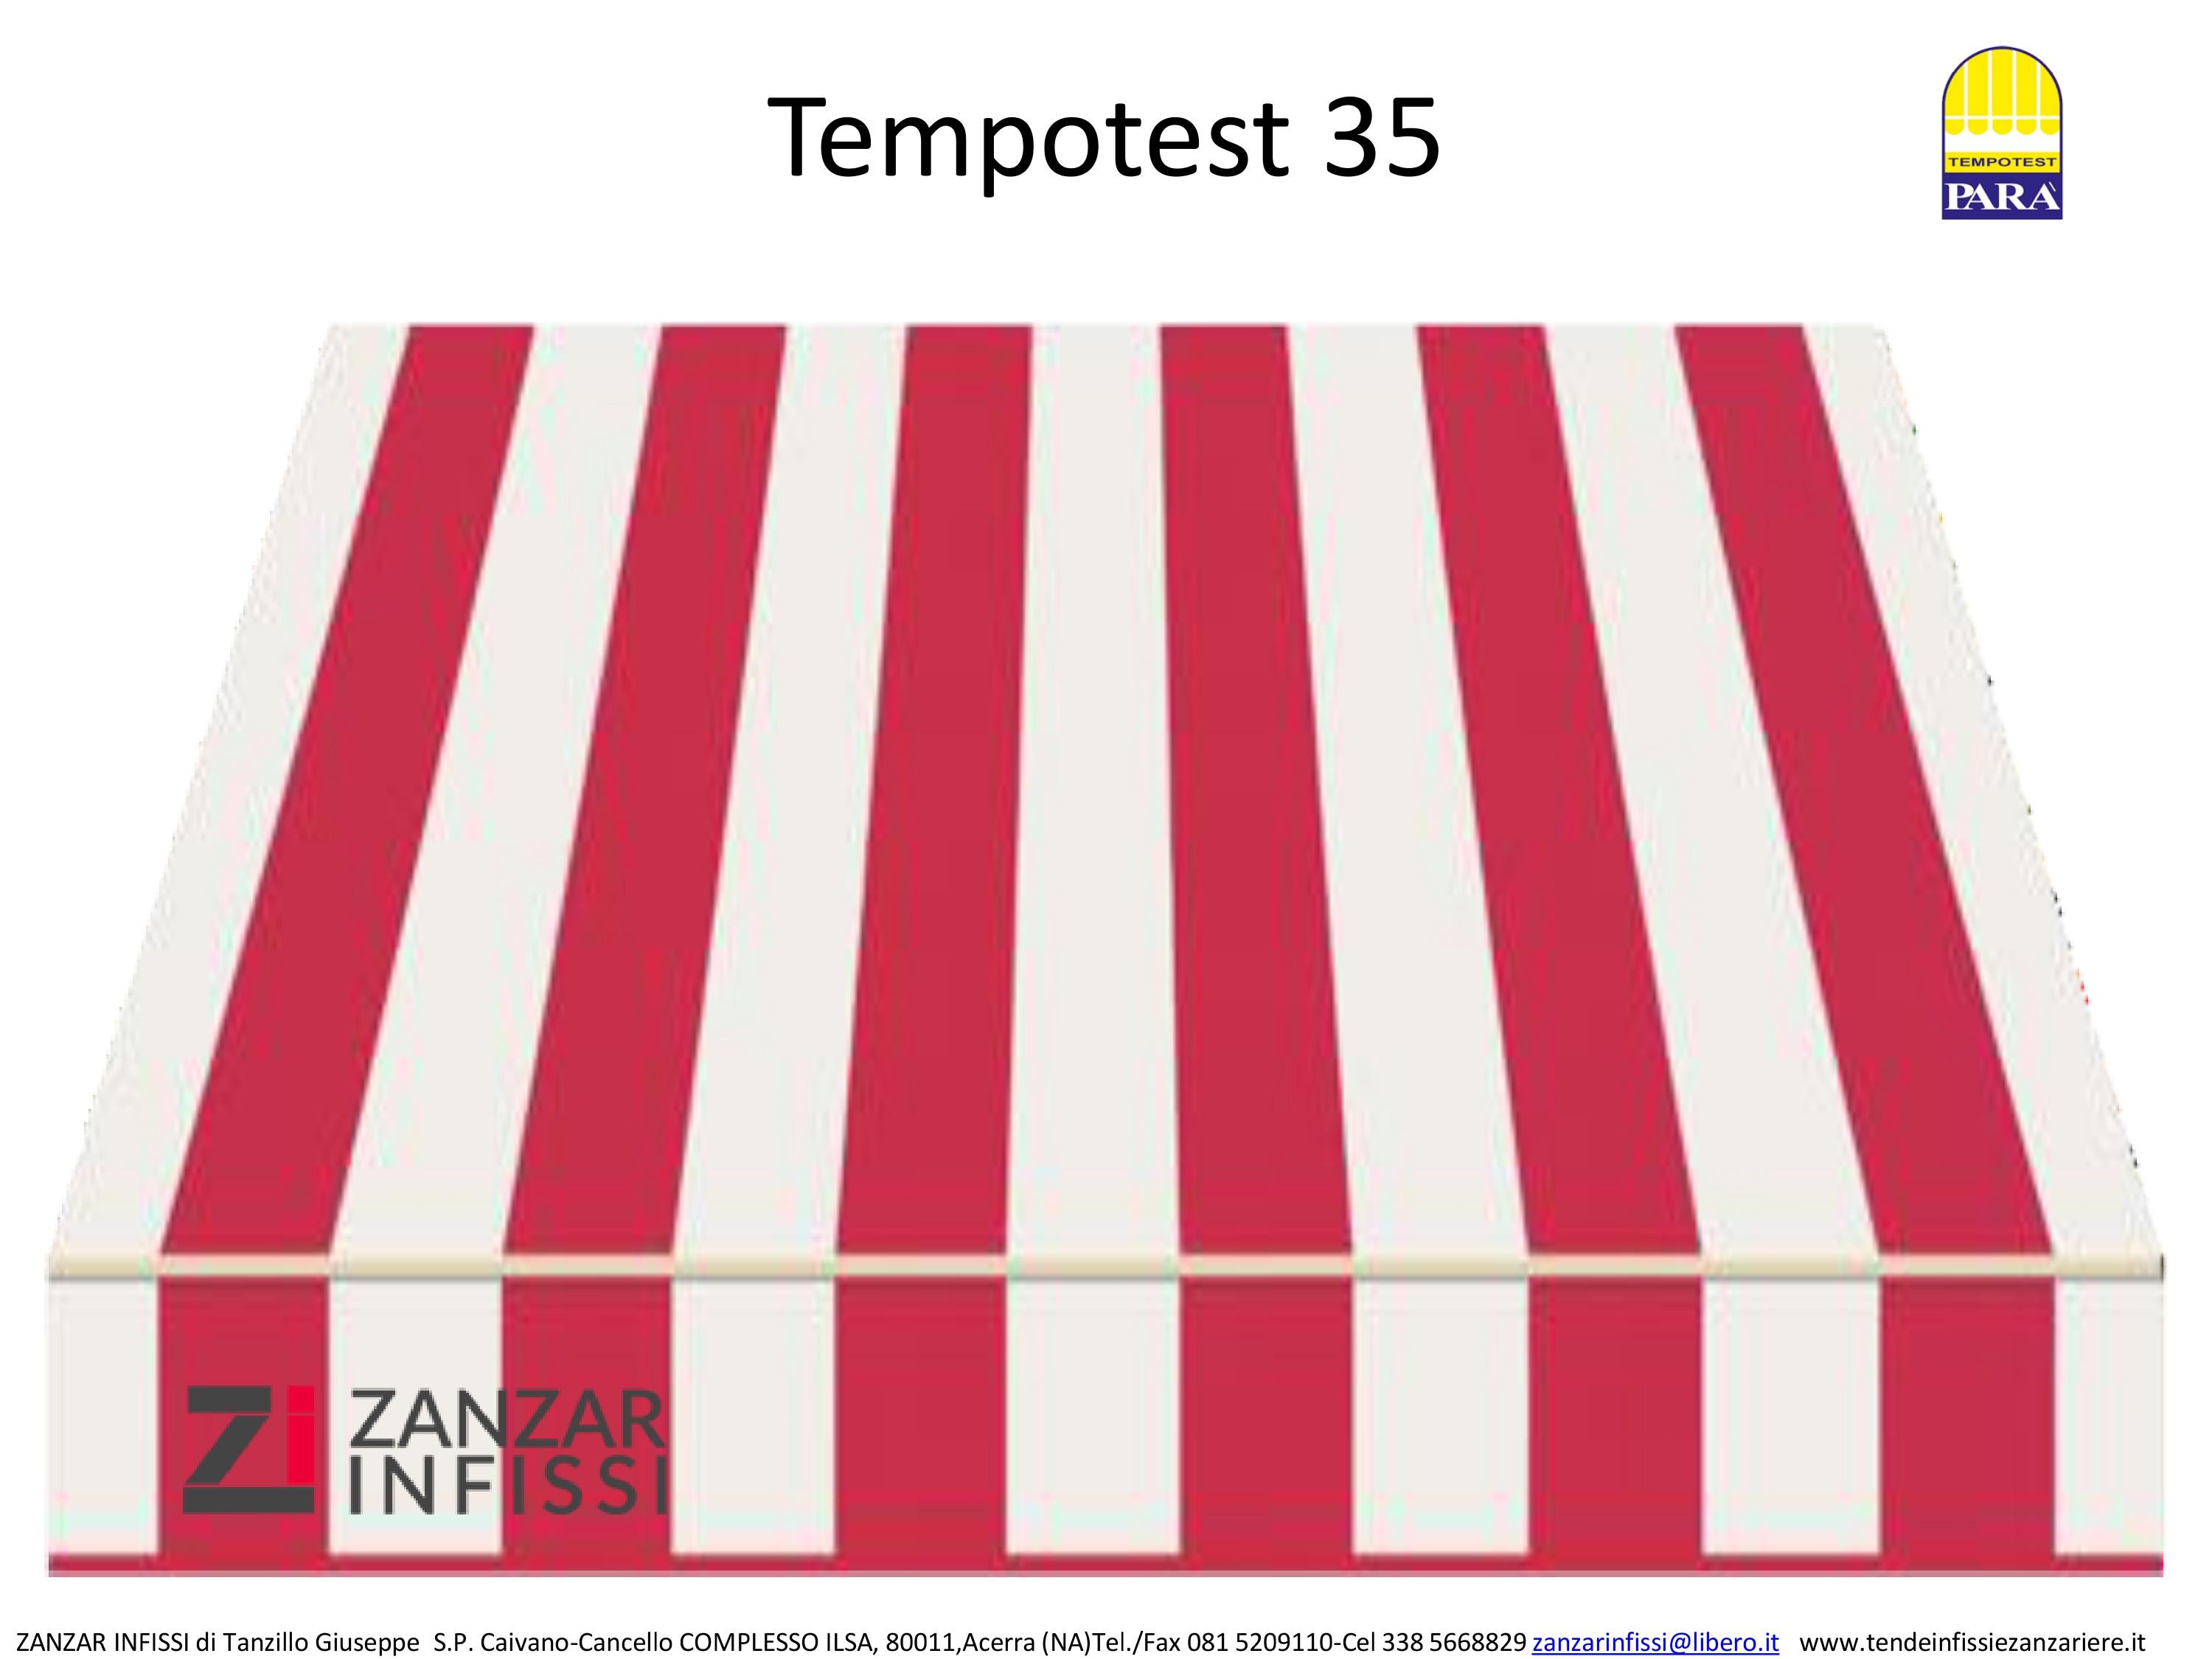 Tempotest 35